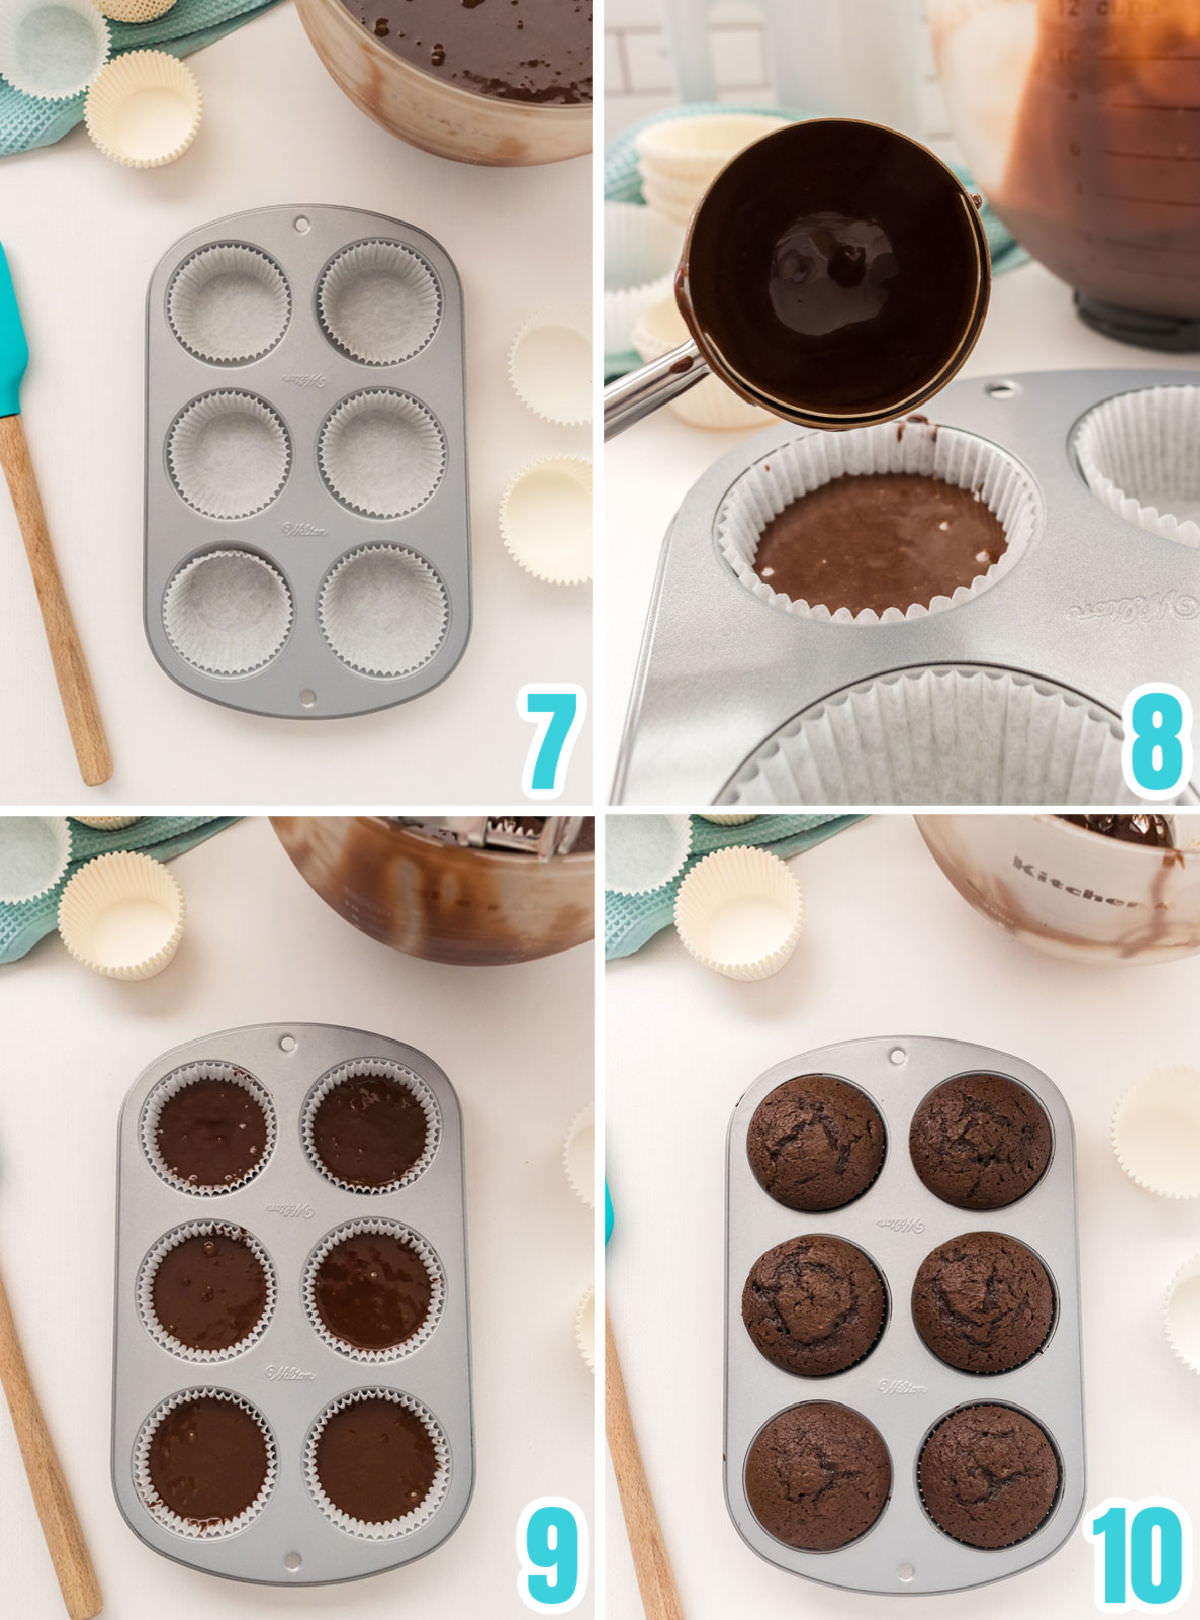 Collage image showing how to bake cupcakes.